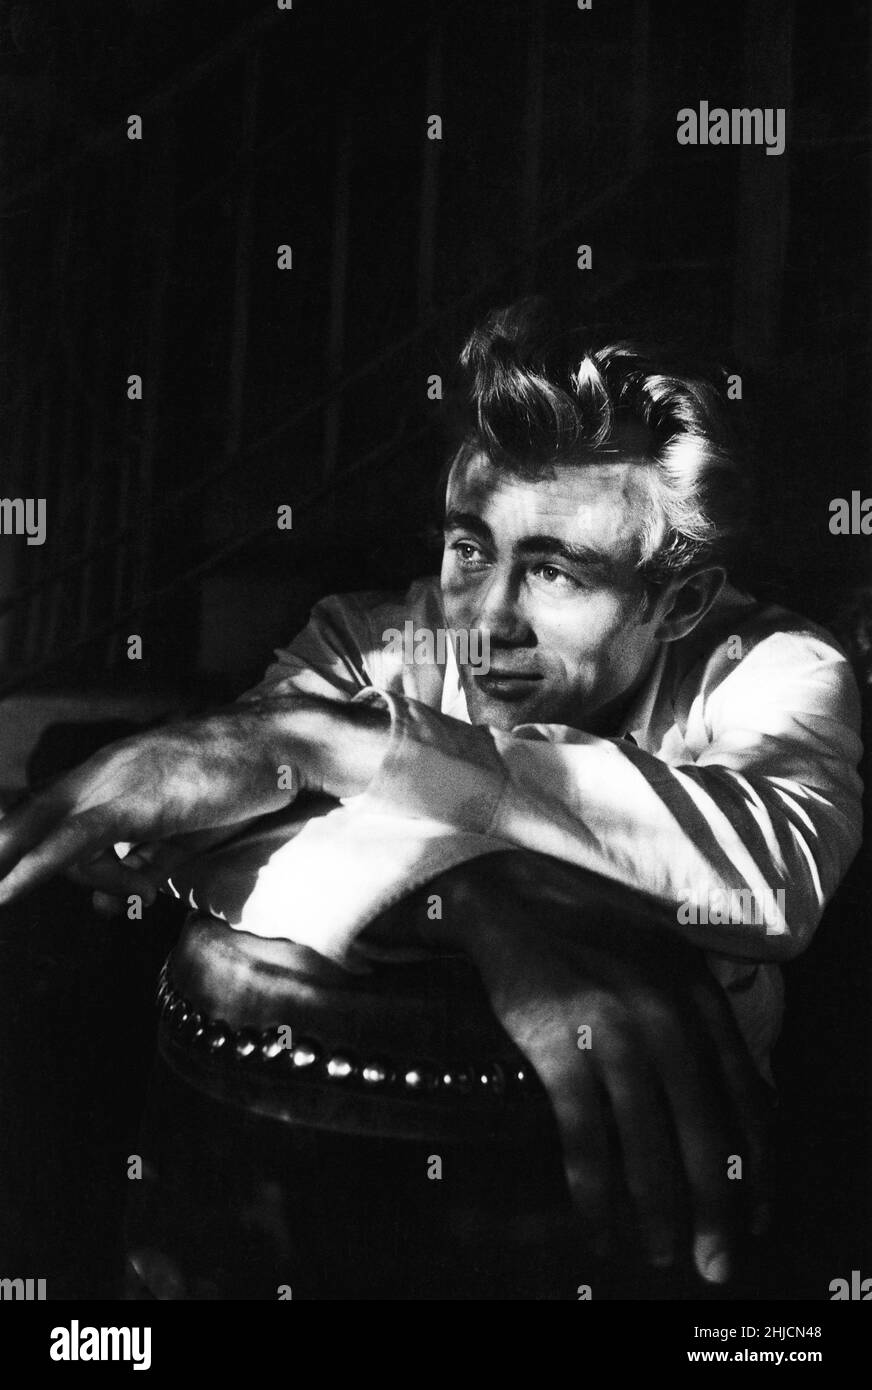 James Dean, actor, was born in Marion, Indiana, on February 8, 1931. His fame is based on three movies, East of Eden, Rebel Without a Cause and Giant. With the success and earnings of East of Eden he purchased a Porsche (one of two) which he raced in between shoots. After finishing his work on Giant he headed out for an important race in his Porsche Spyder 550 and at the intersection of Routes 46 and 41 near Cholame he collided with another car instantly dying on September 30, 1955 at the age of 24. Stock Photo